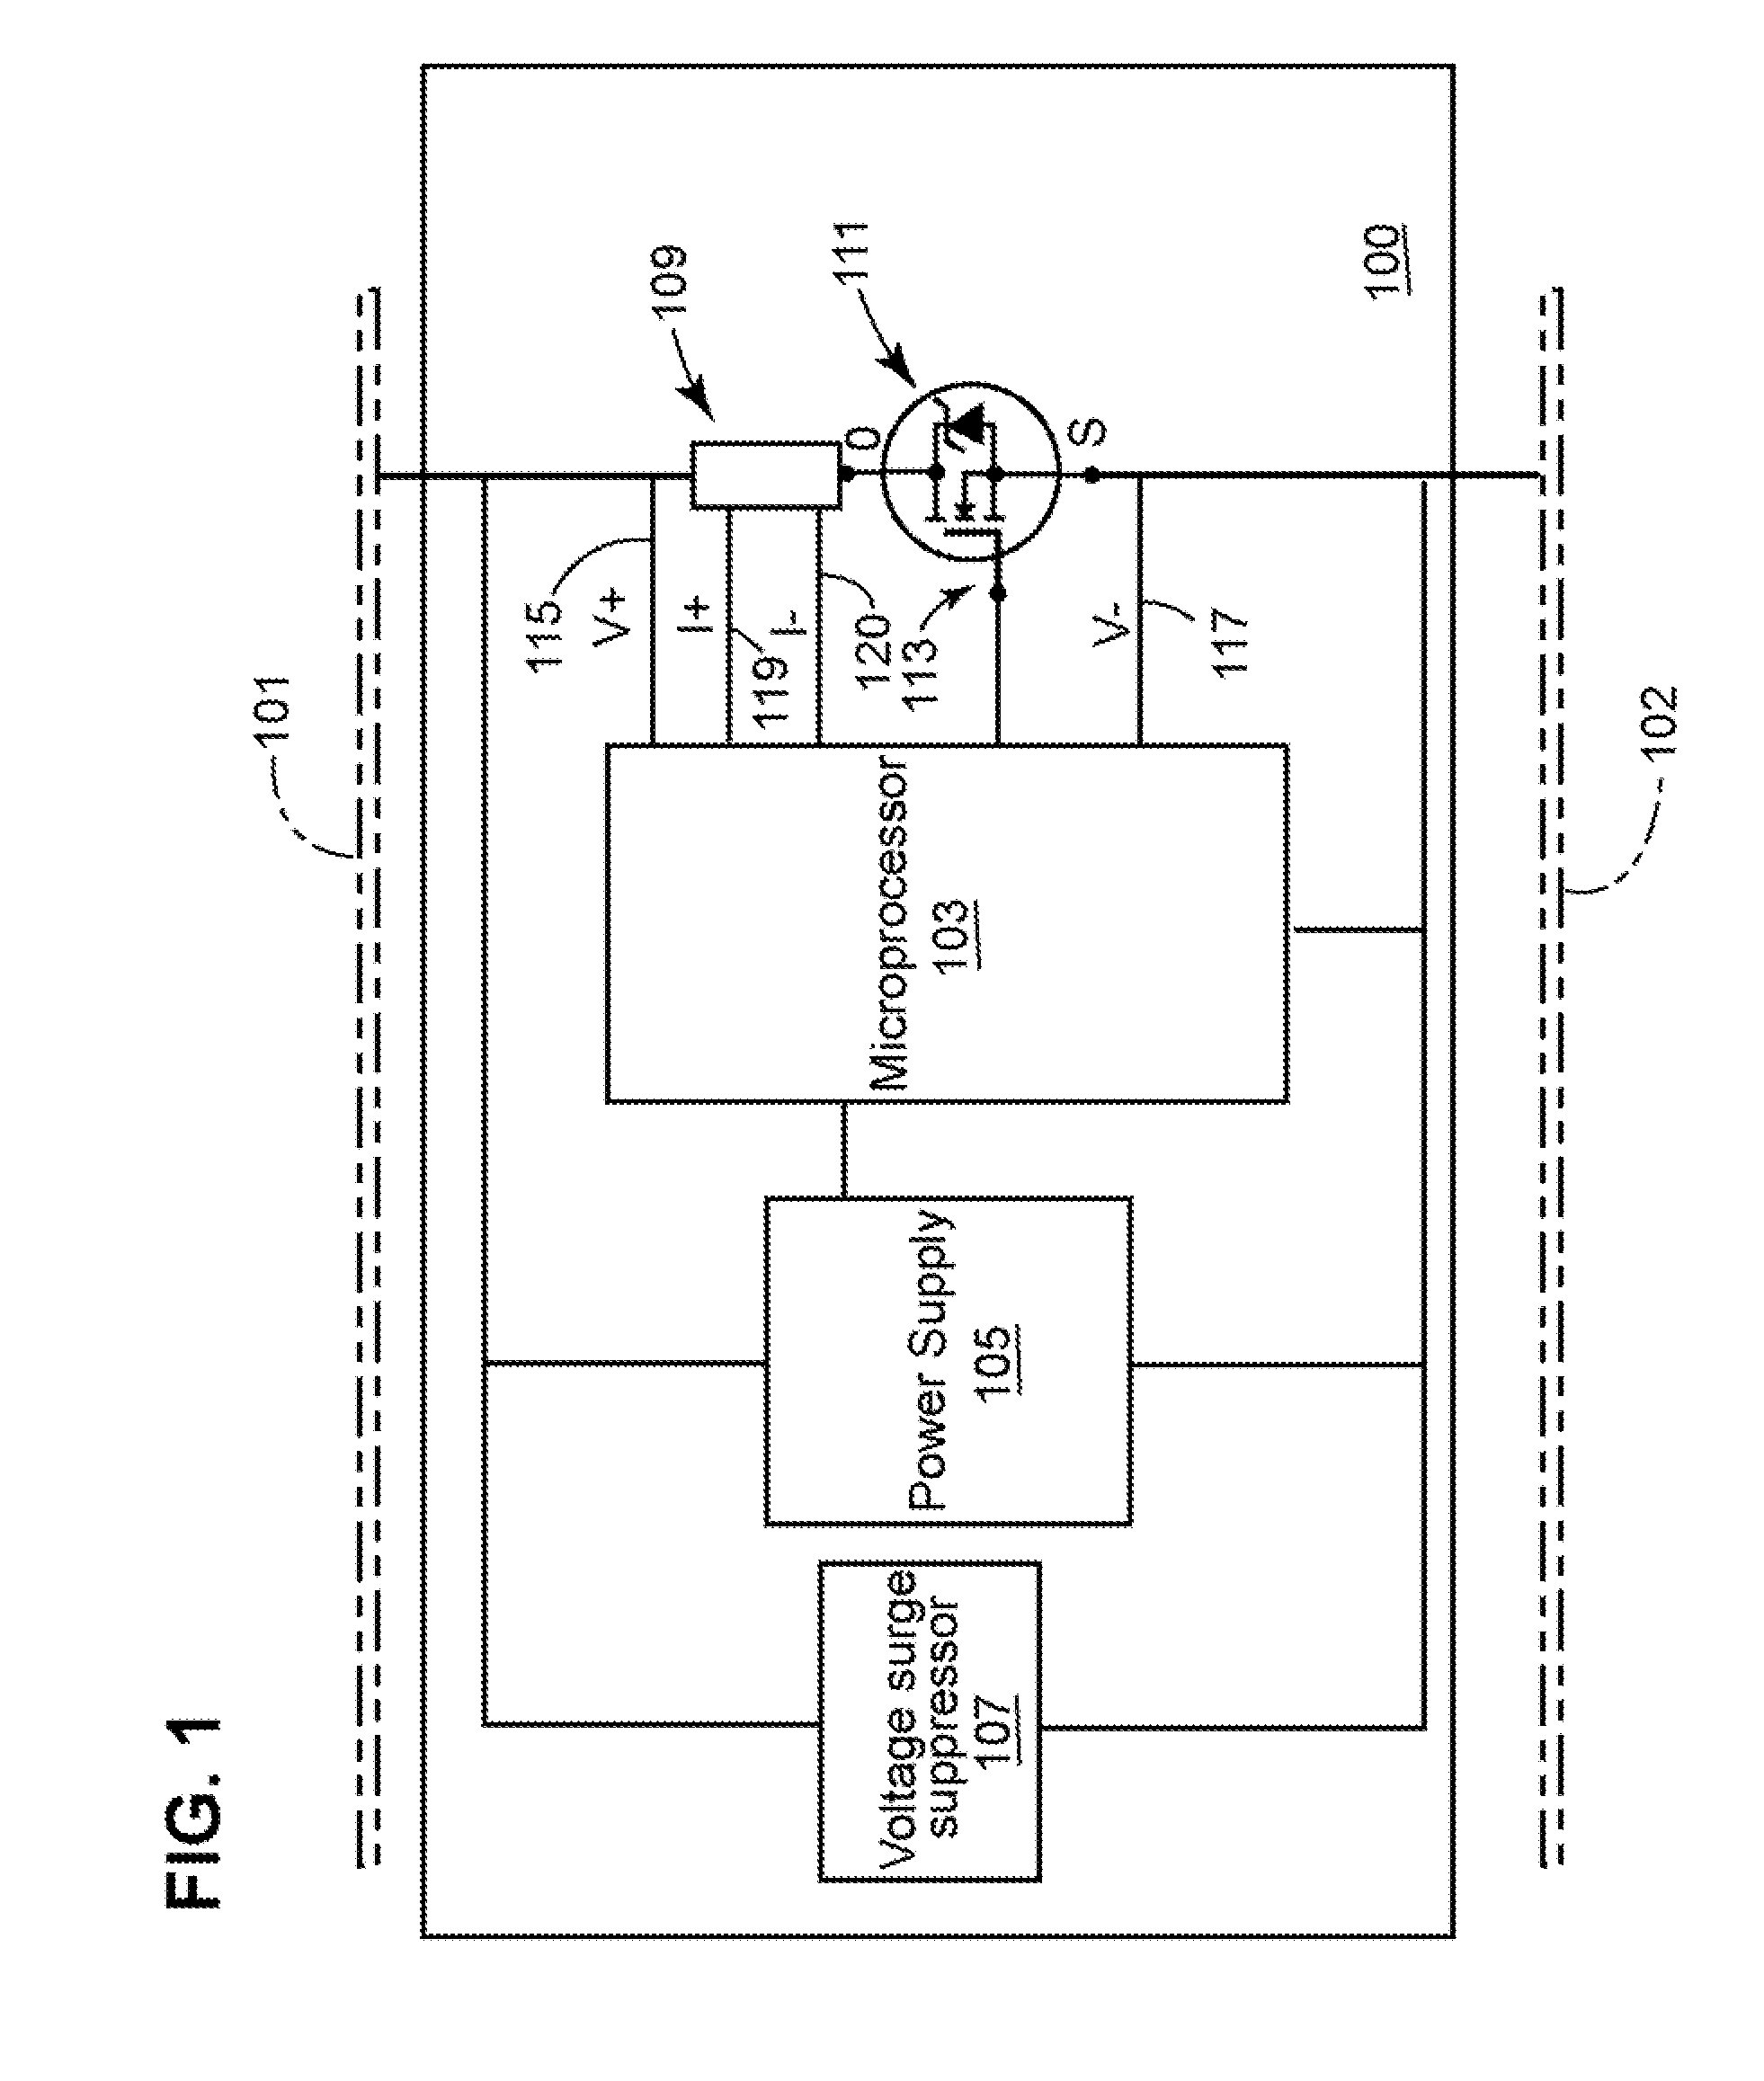 Methods and system for jointless track circuits using passive signaling